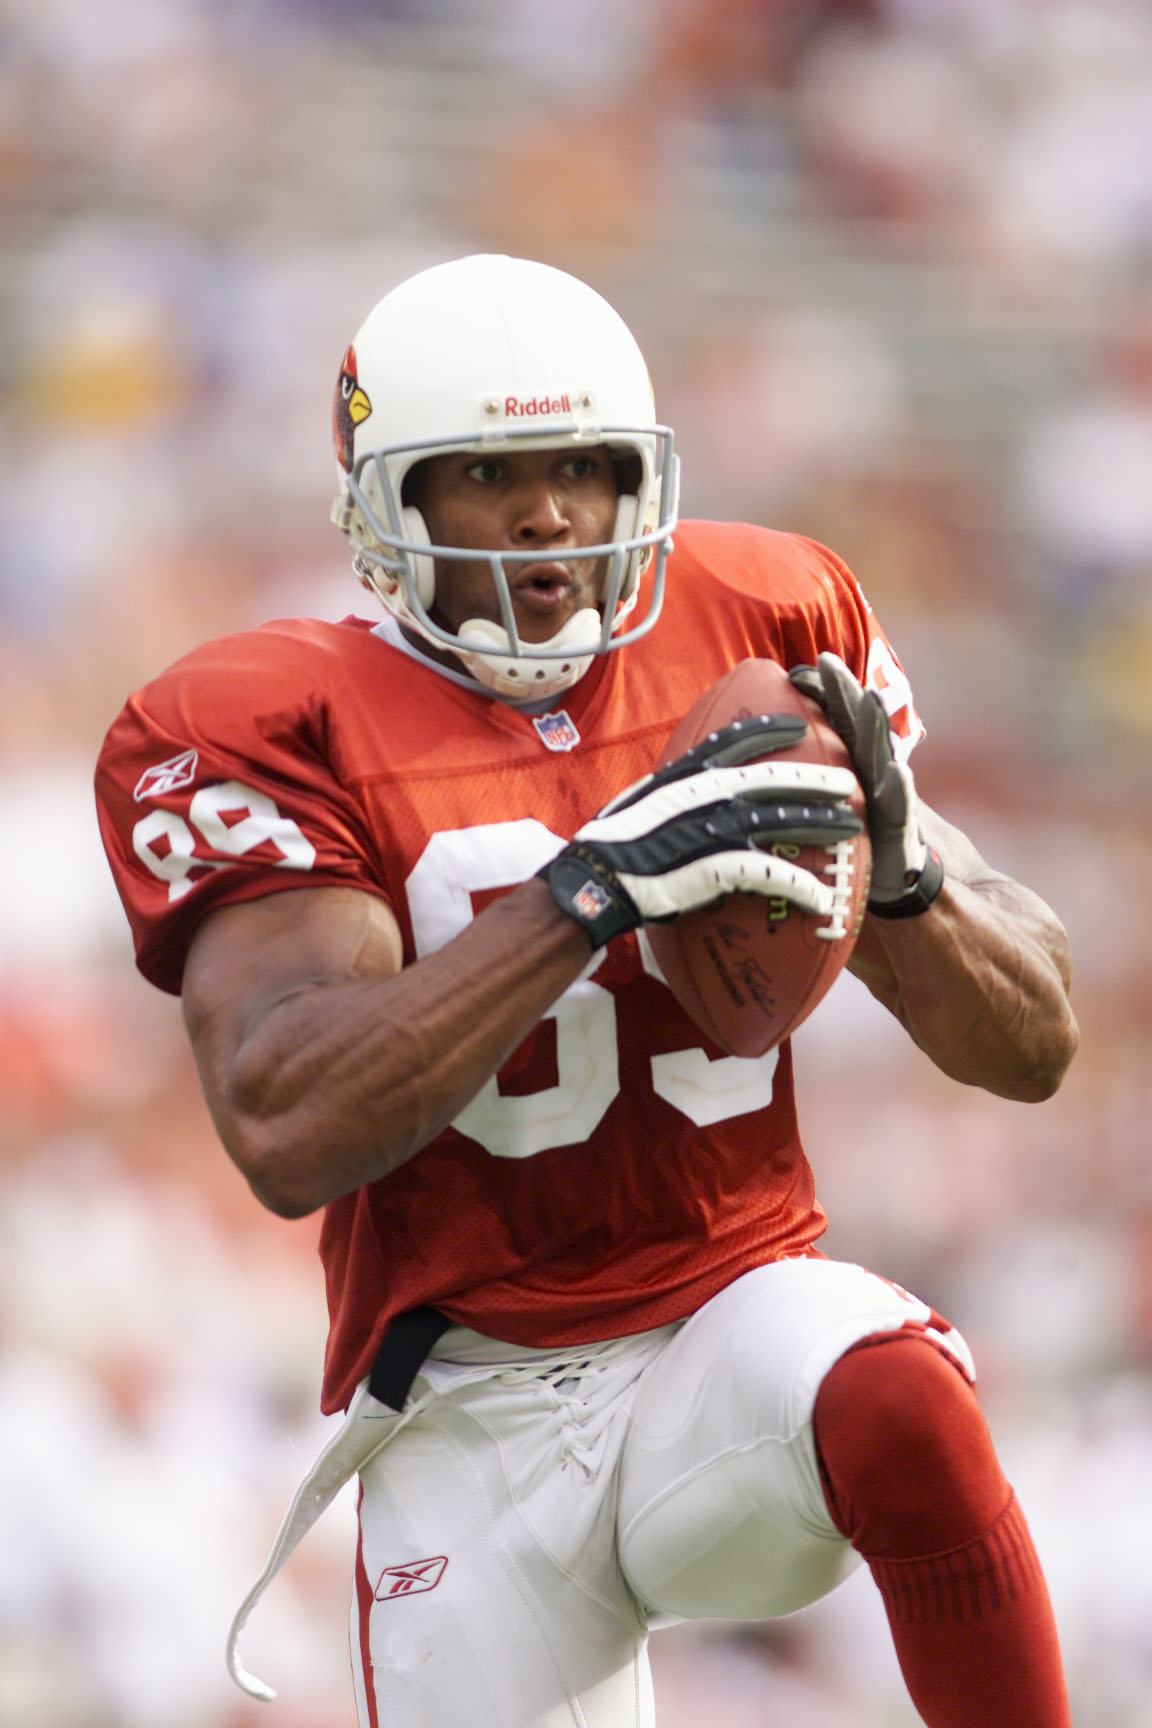 21 Oct 2001: David Boston # 89 of the Arizona Cardinals celebrates his touchdown against the Kansas City Chiefs during the game at the Sun Devil Stadium in Tempe, Arizona. The Arizona Cardinals win, 24-16 over the Kansas City Chiefs.  DIGITAL IMAGE Mandat